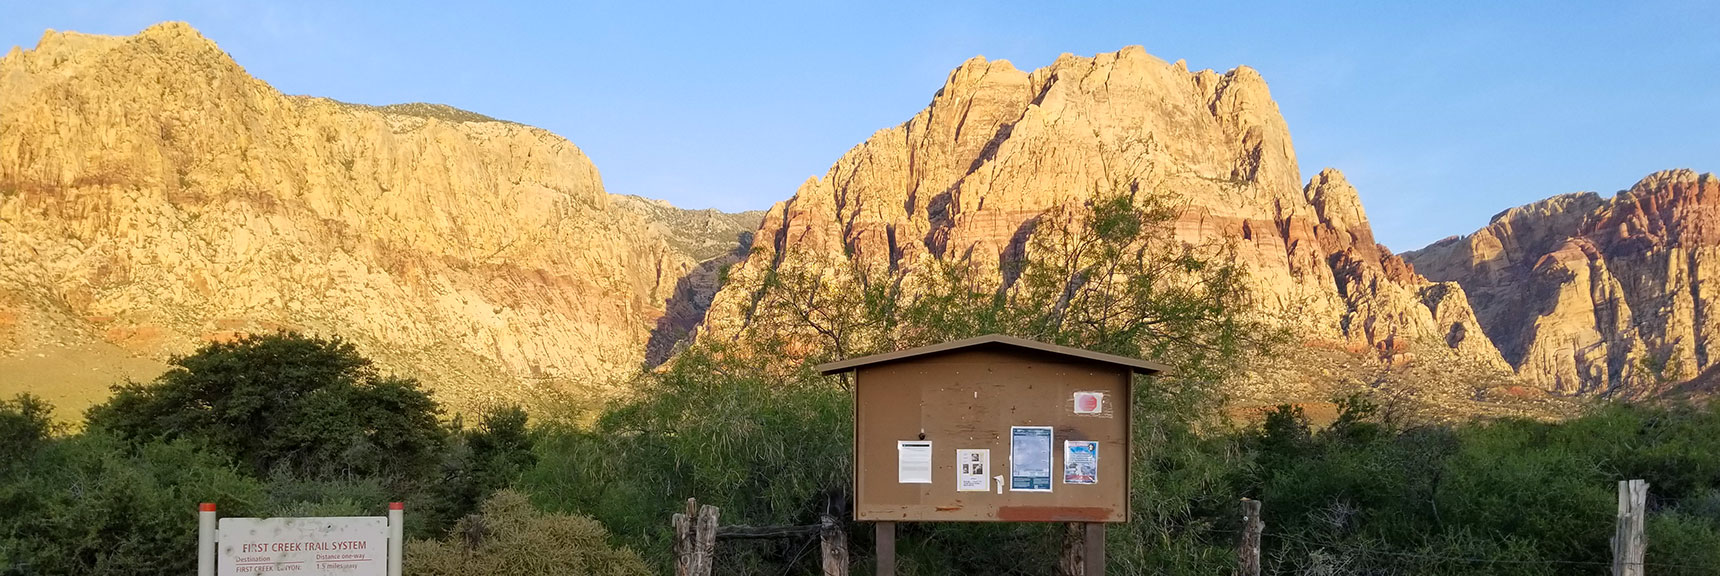 First Creek Trailhead to Mt Wilson in Red Rock Canyon, Nevada